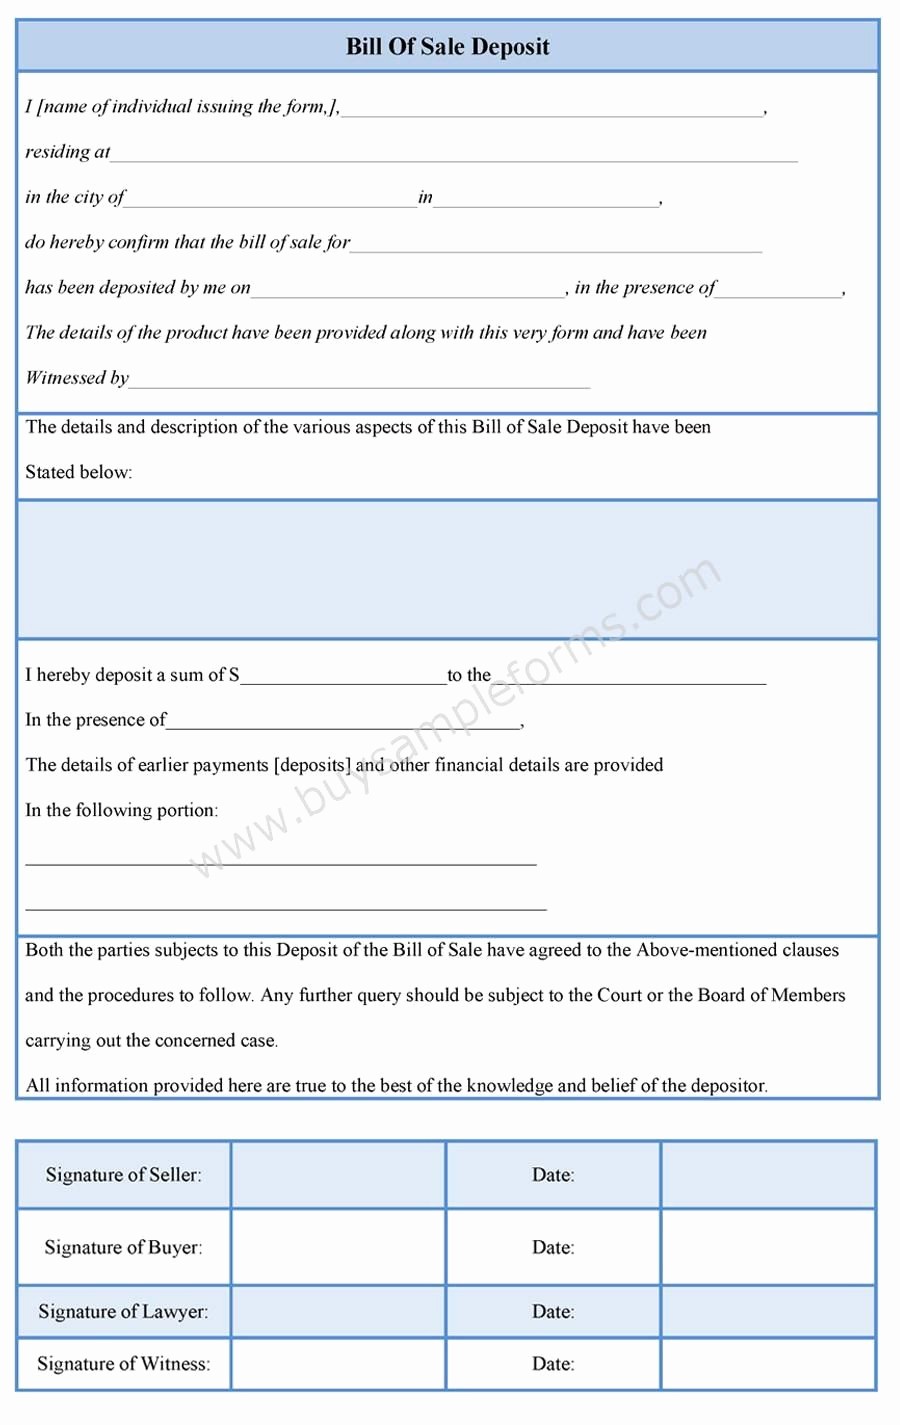 Bill Of Sale form Example Awesome Bill Of Sale Deposit form Bill Of Sale forms